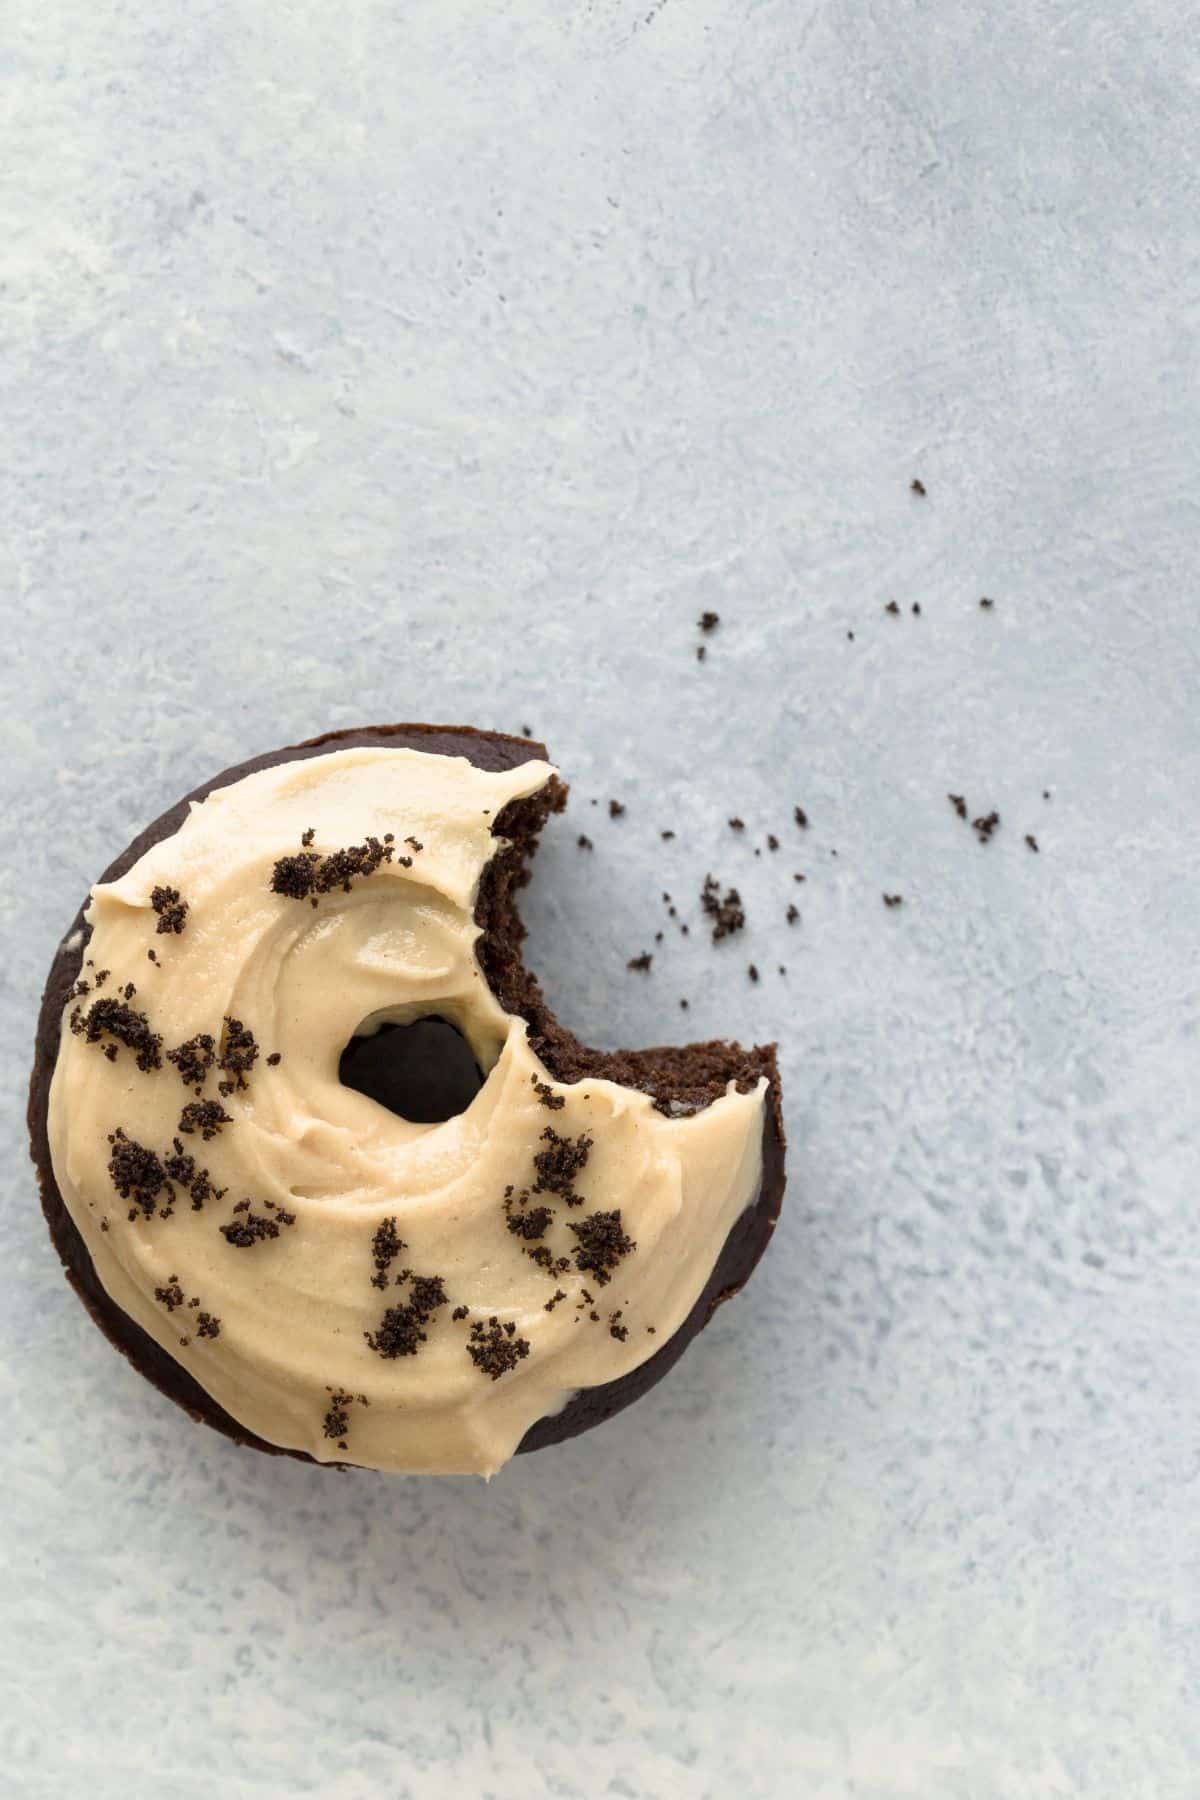 A baked chocolate peanut butter donut with a bite taken out.